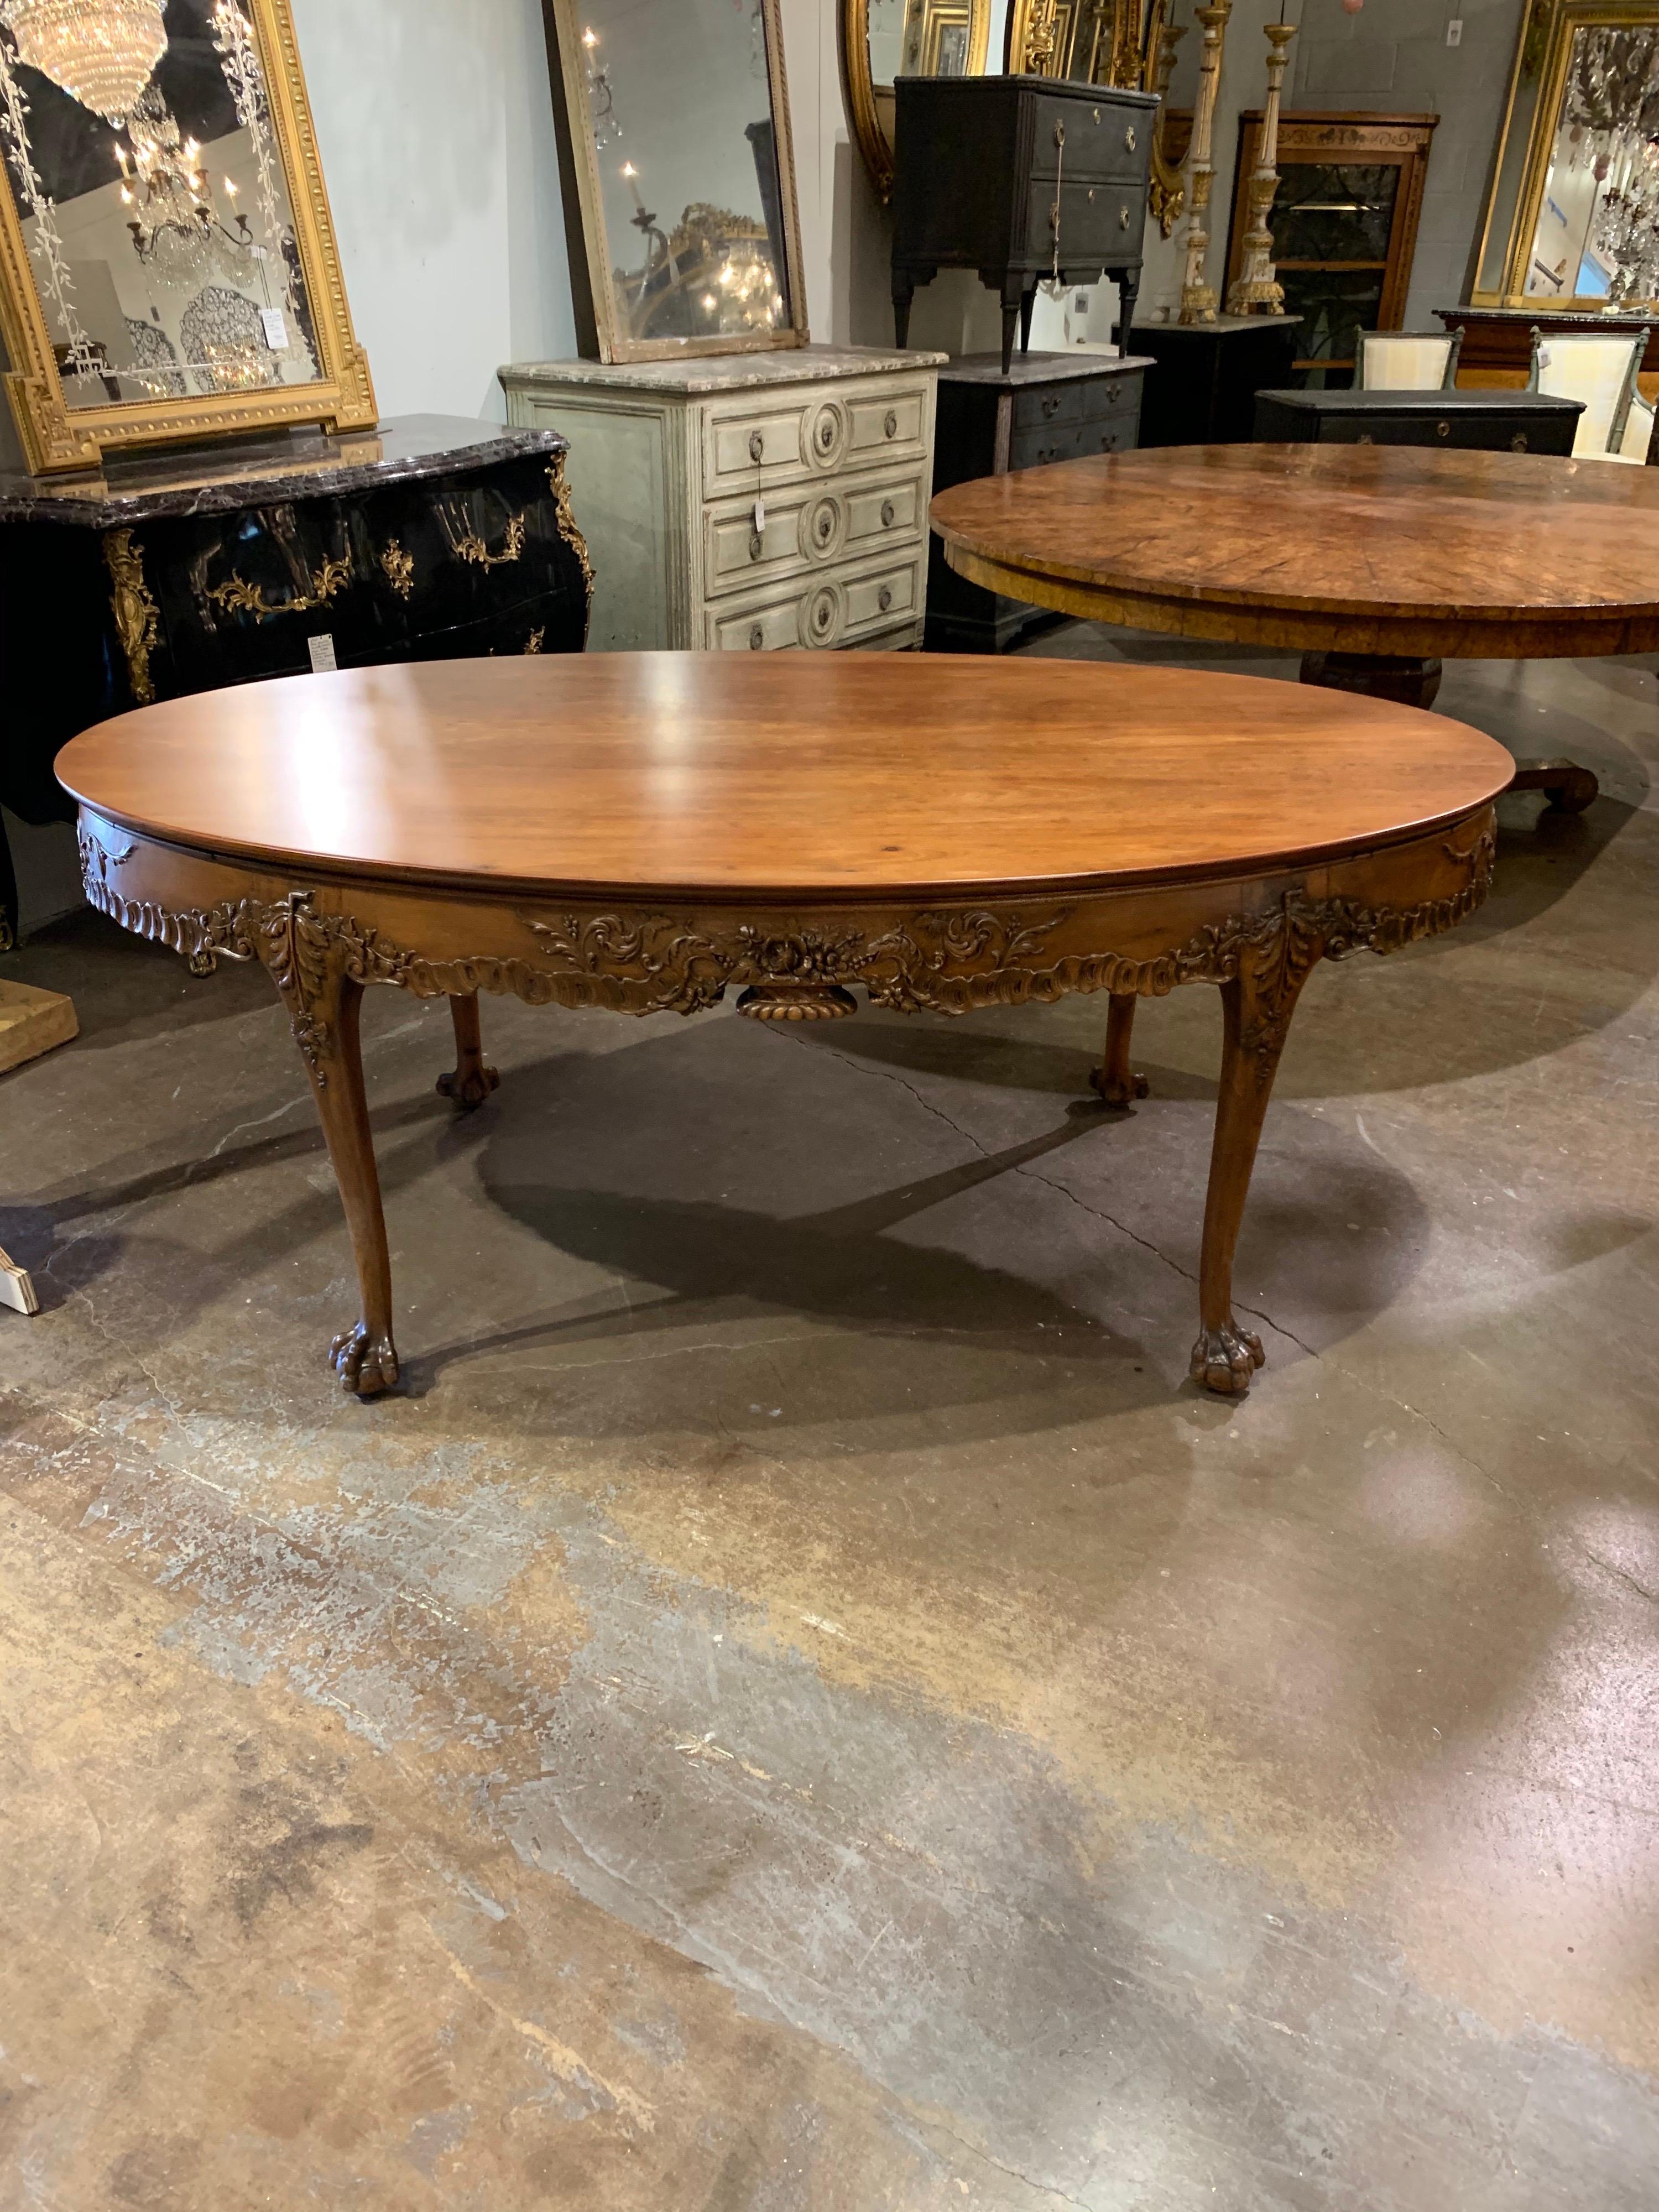 Gorgeous 19th century English carved mahogany oval breakfast table. The carvings on this table are superb. Beautiful finish as well. An outstanding piece!